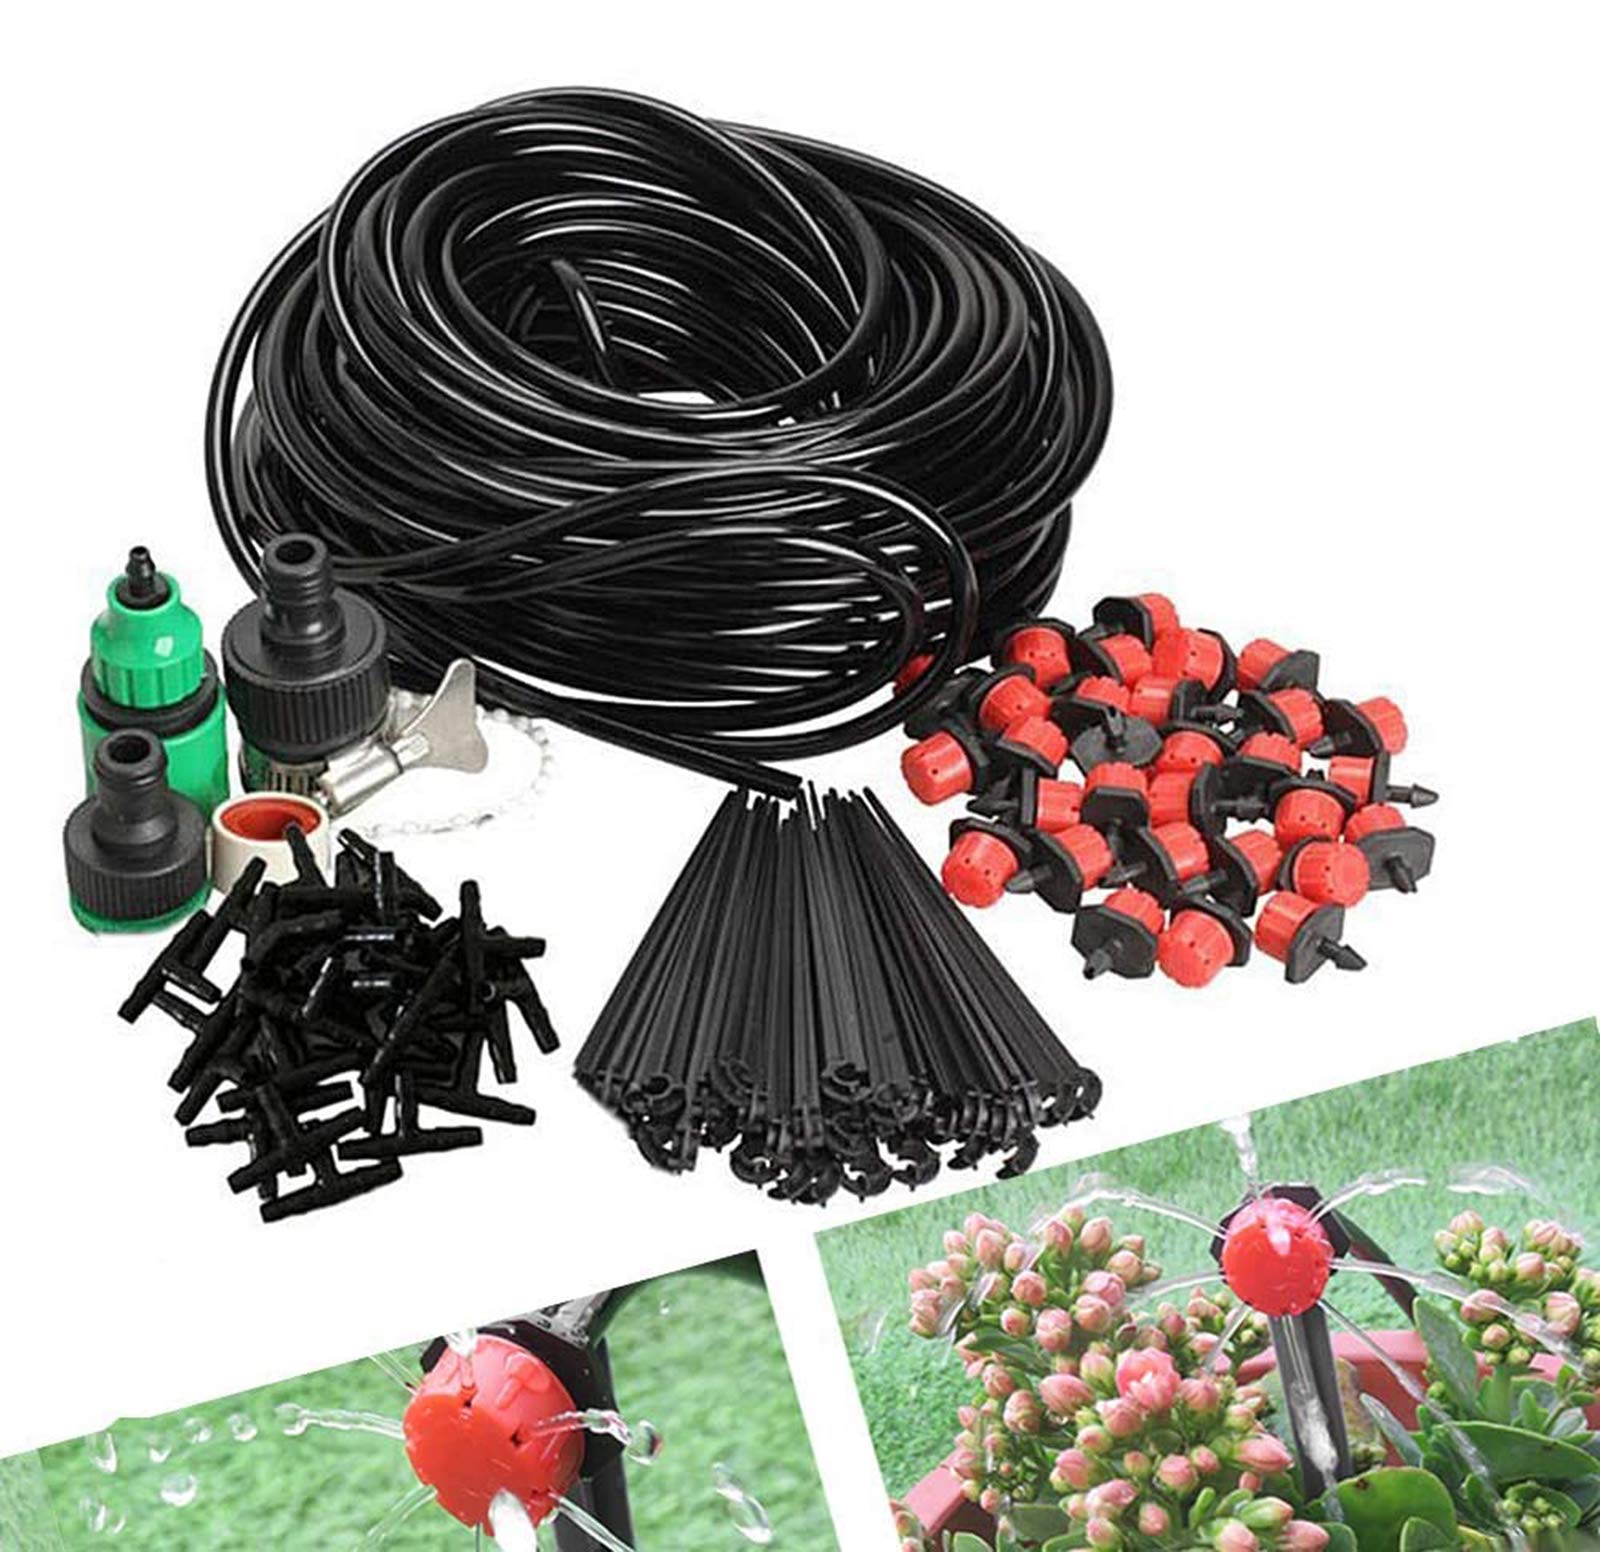 DIY Drip Irrigation System Automatic Watering Kit